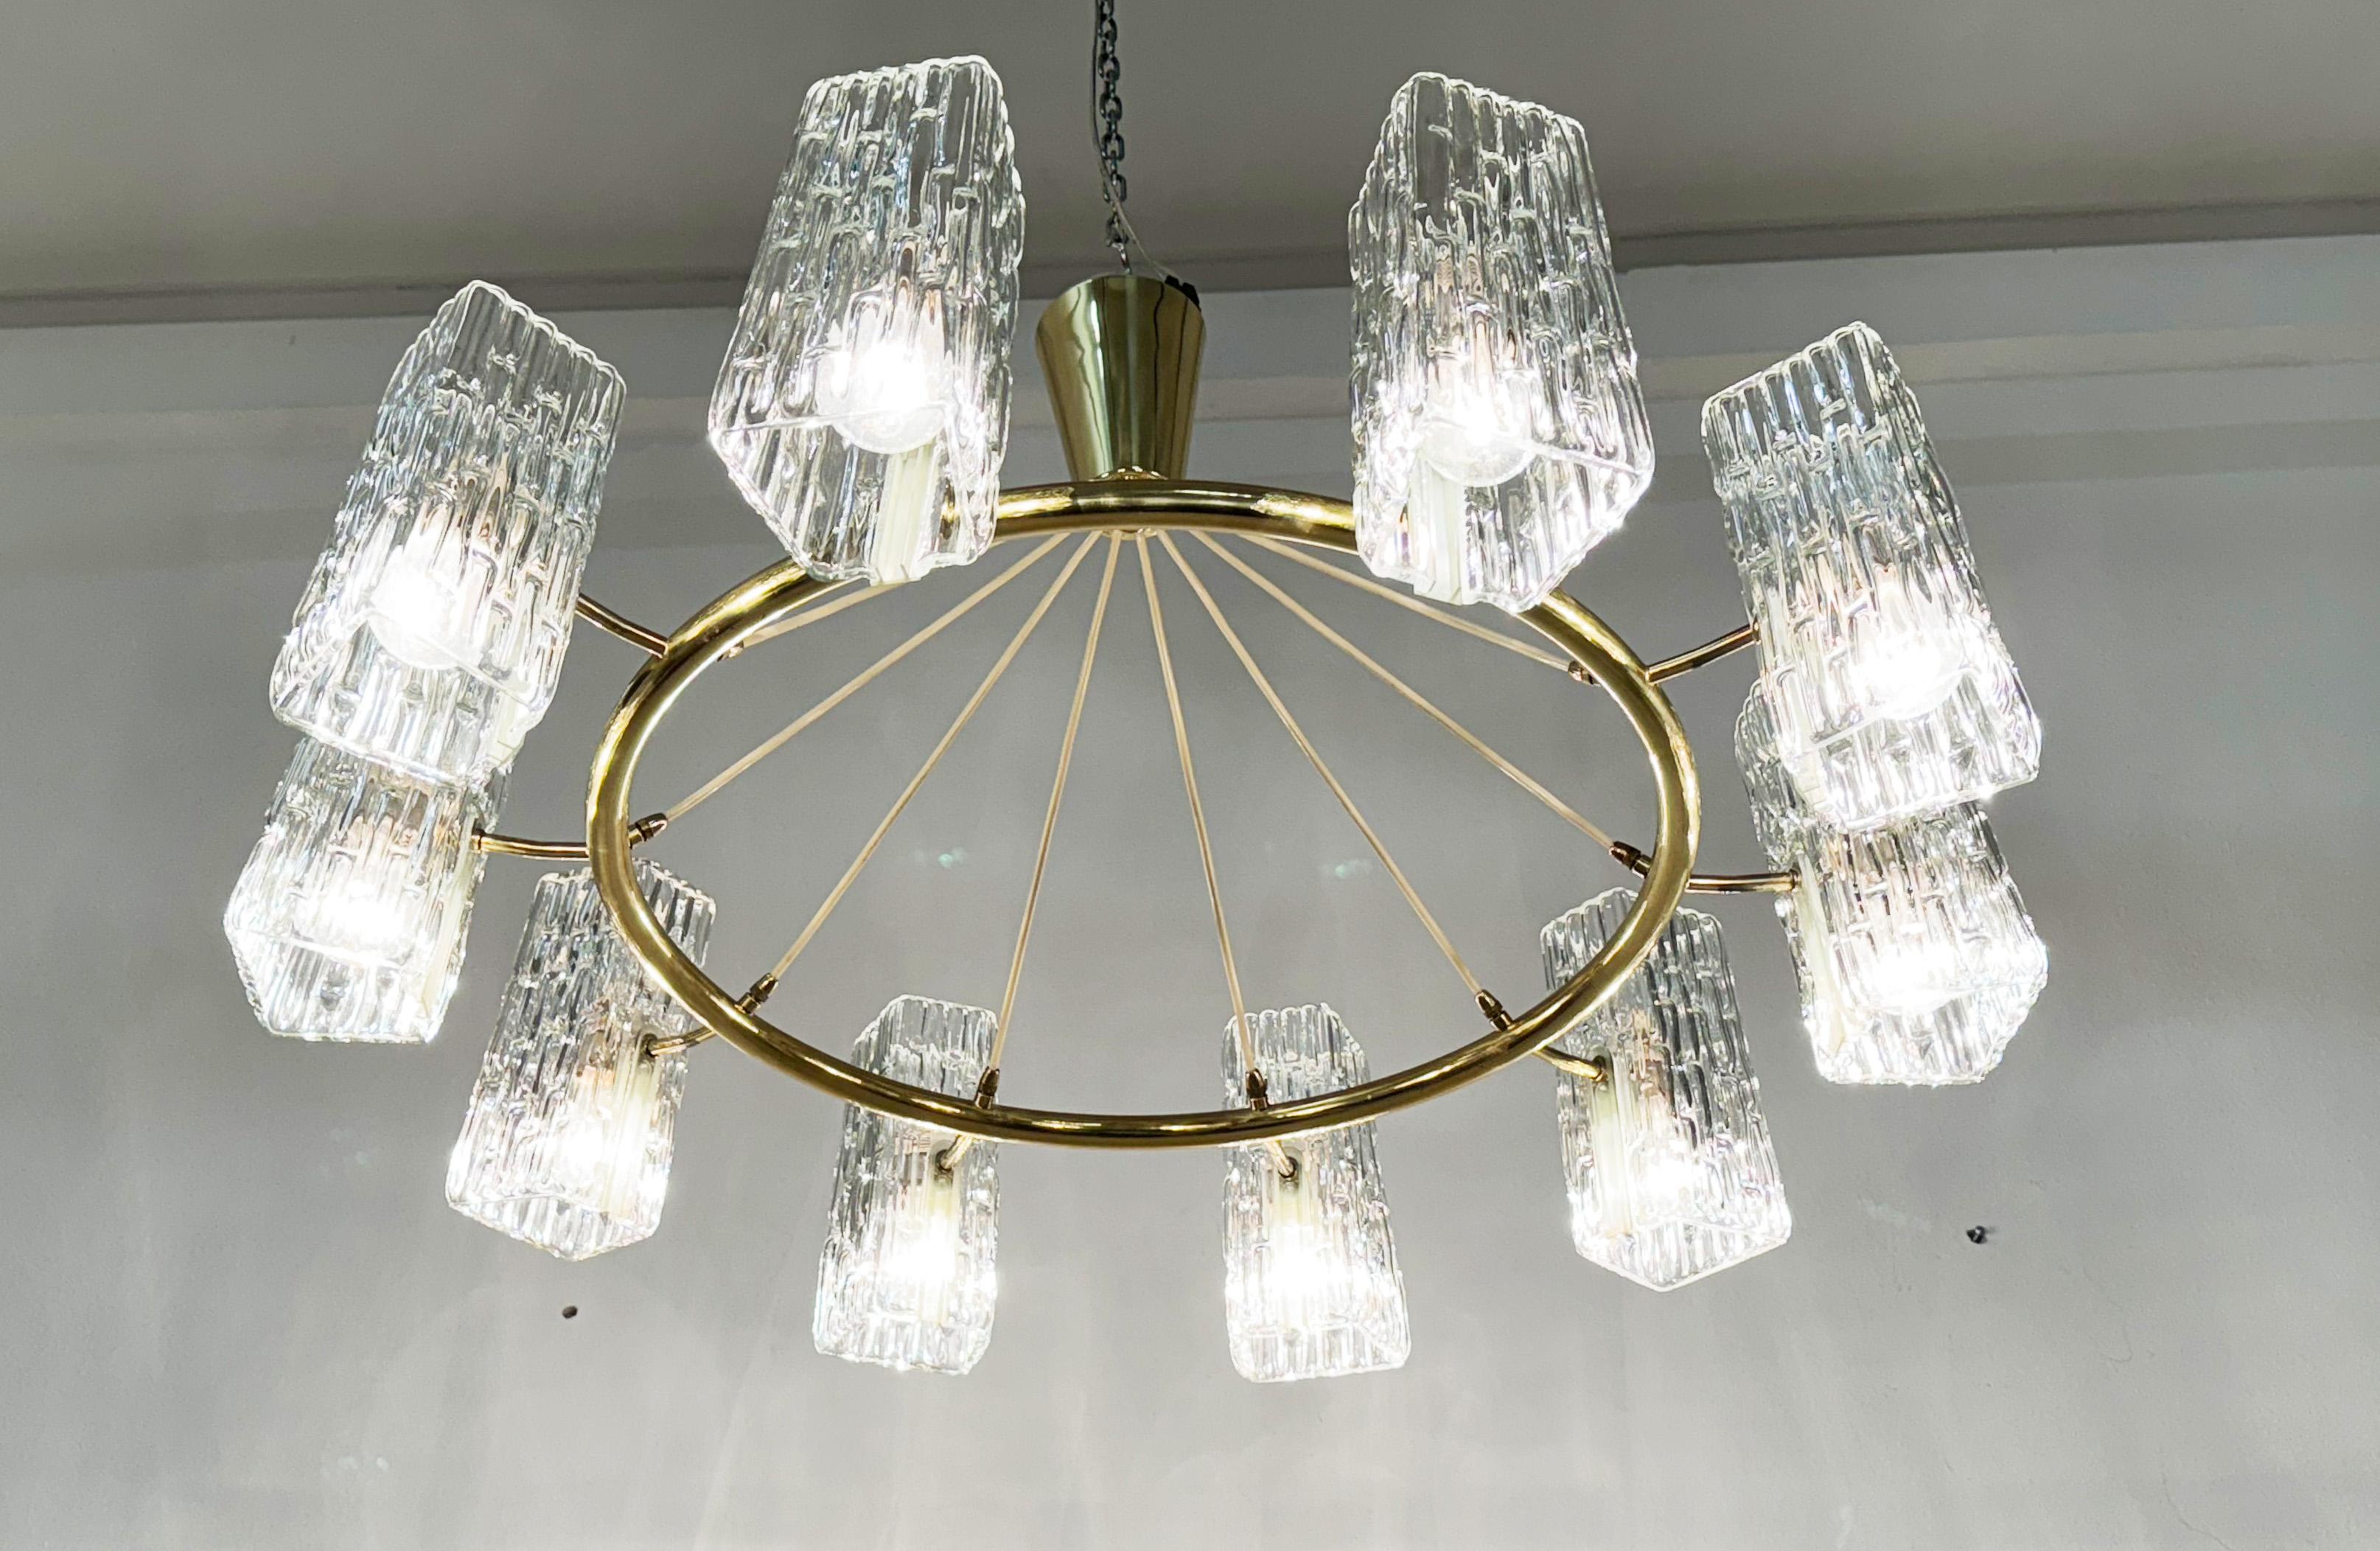 Huge Midcentury Brass Chandelier With Pressed Glass Shades By Rupert Nikoll For Sale 5